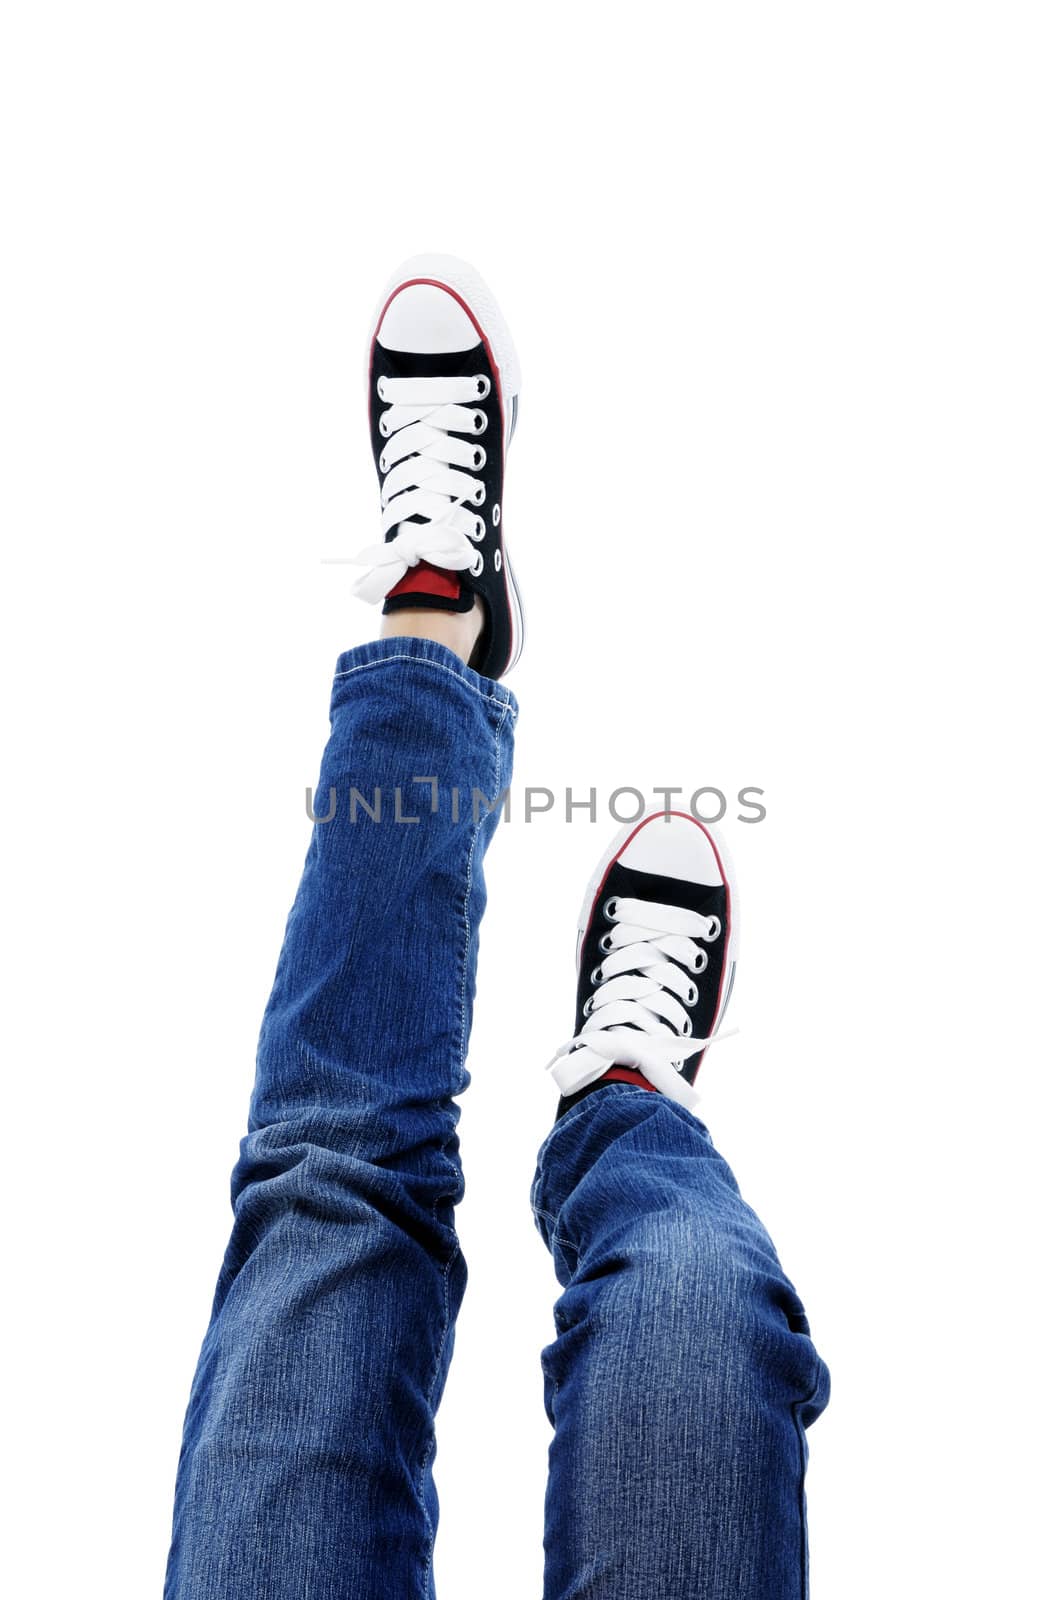 In jeans and sneakers over white background by williv